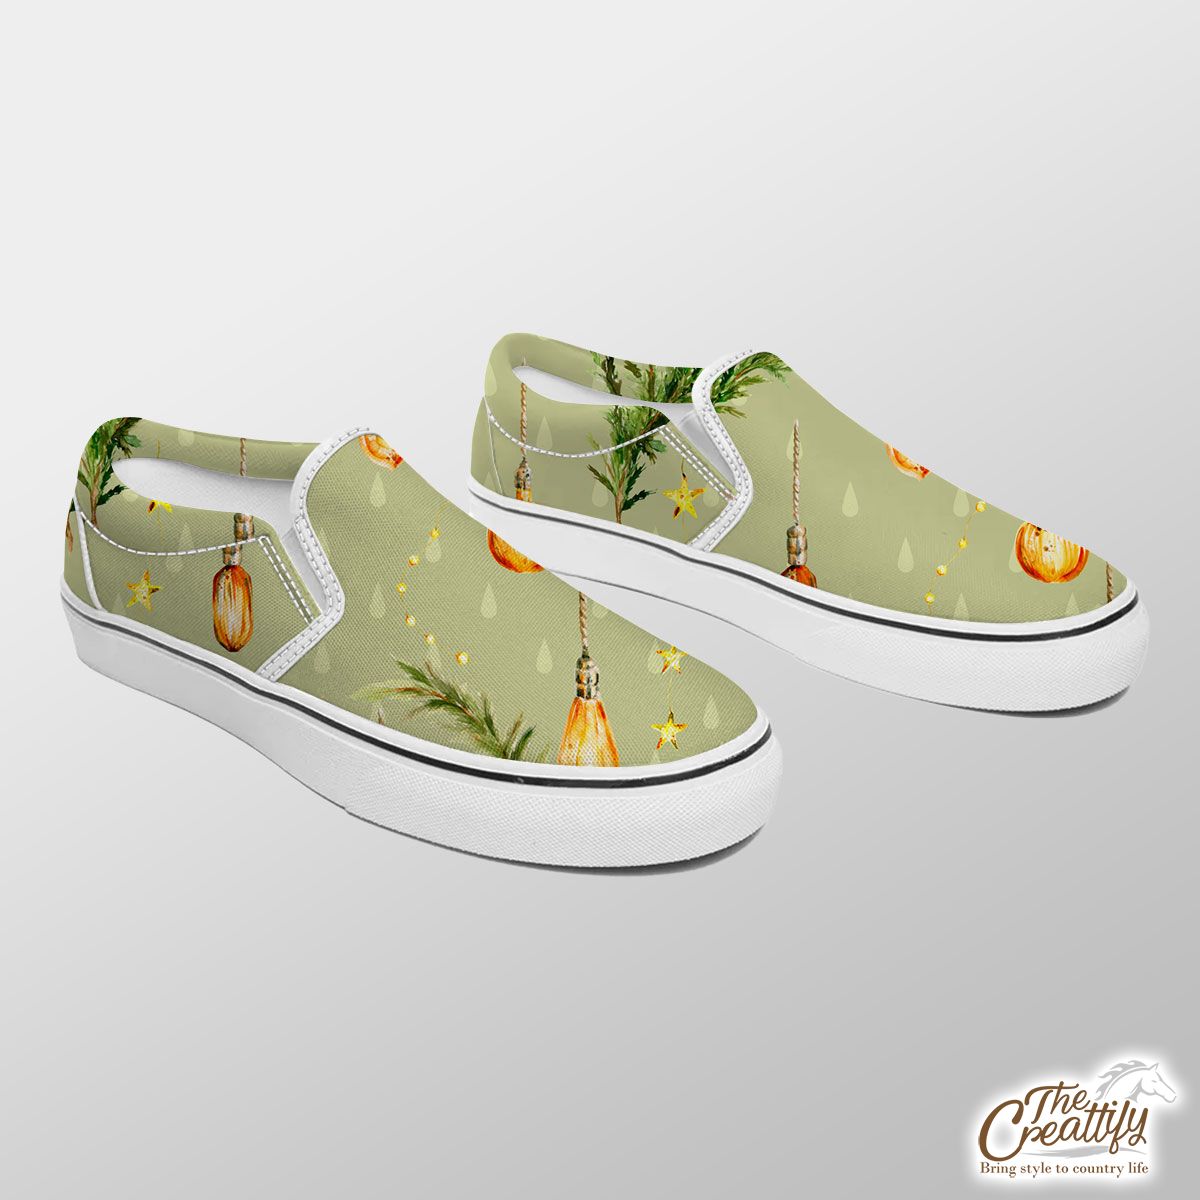 Christmas Lights With Pine Tree Pattern Slip On Sneakers